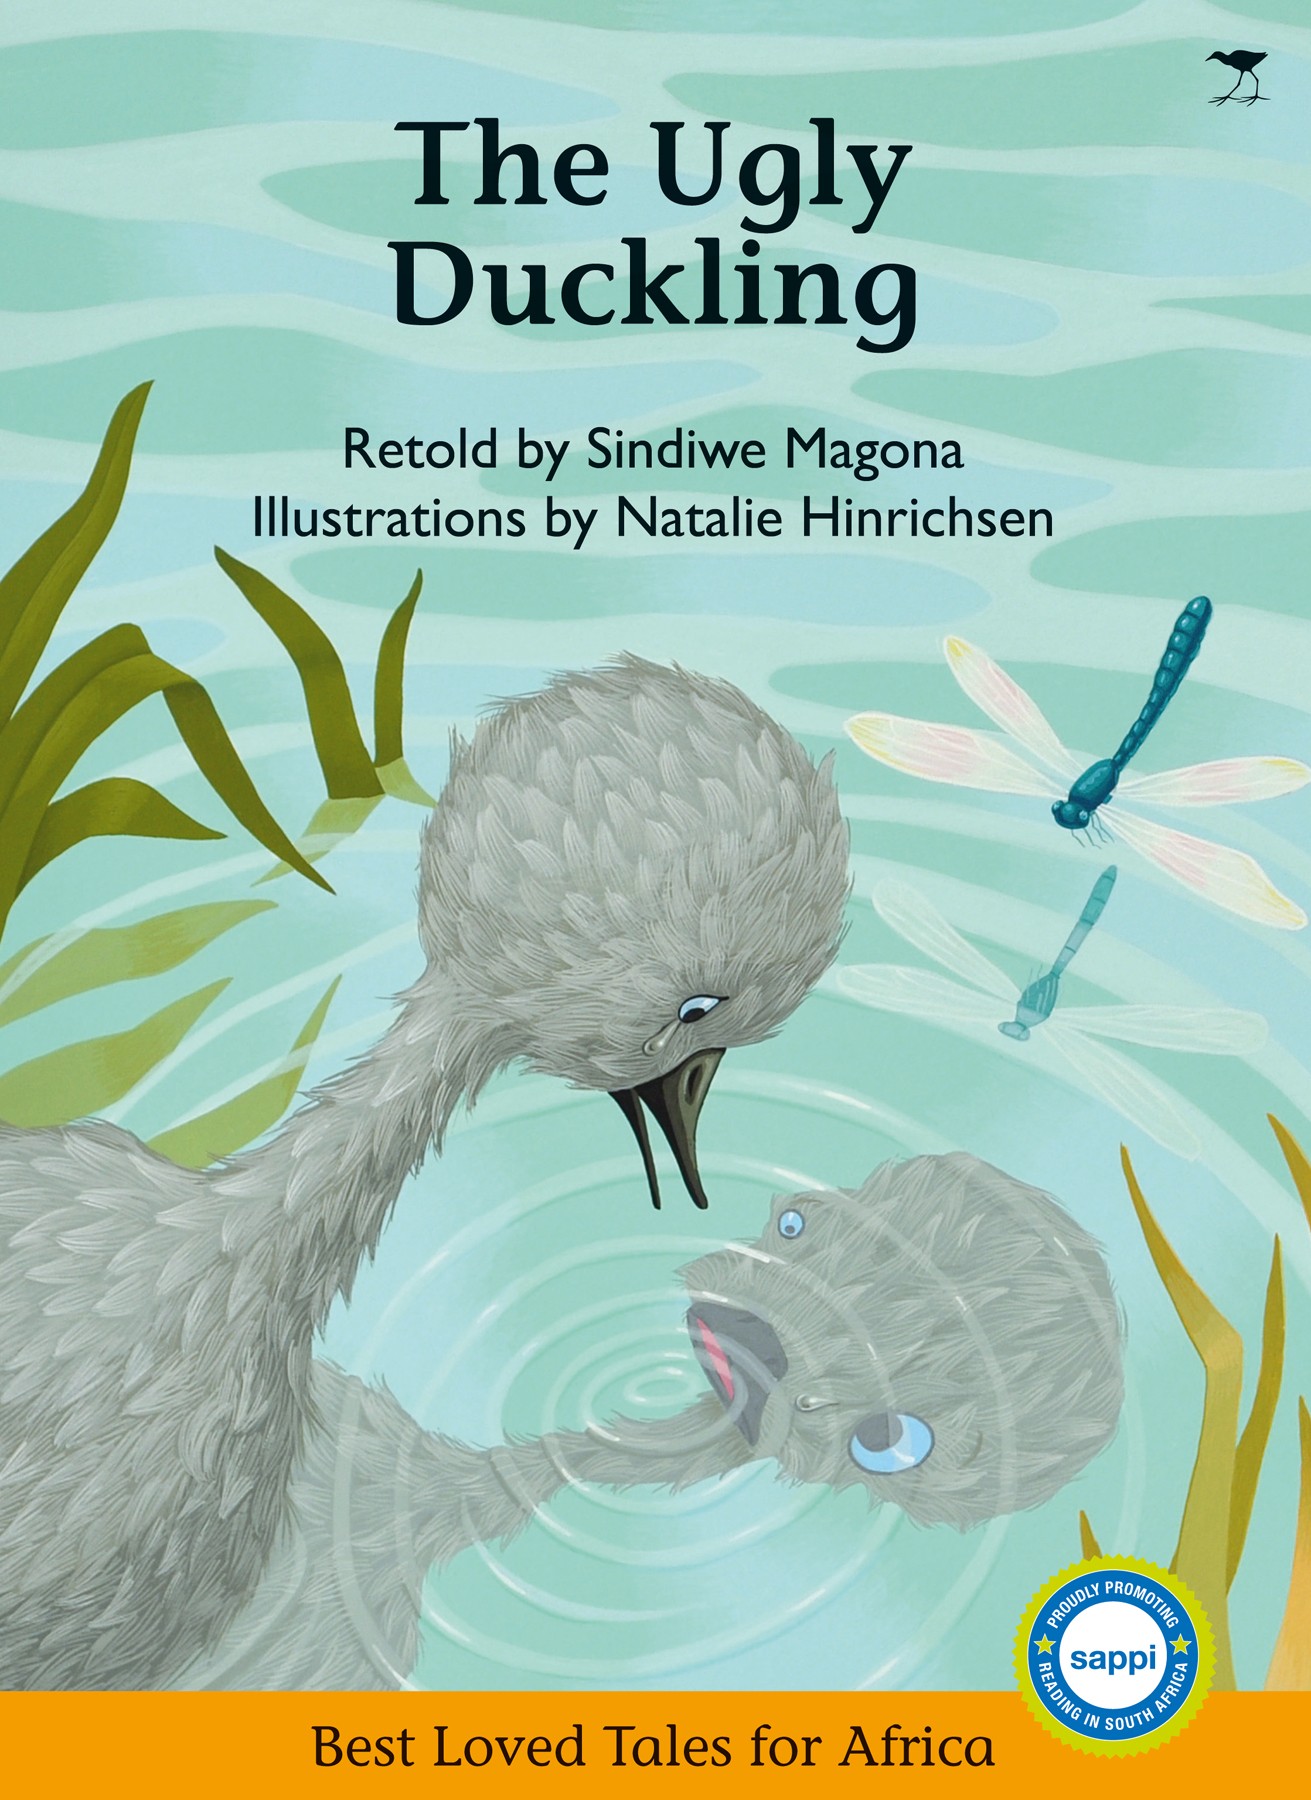 The Ugly Duckling - Children's Book Network